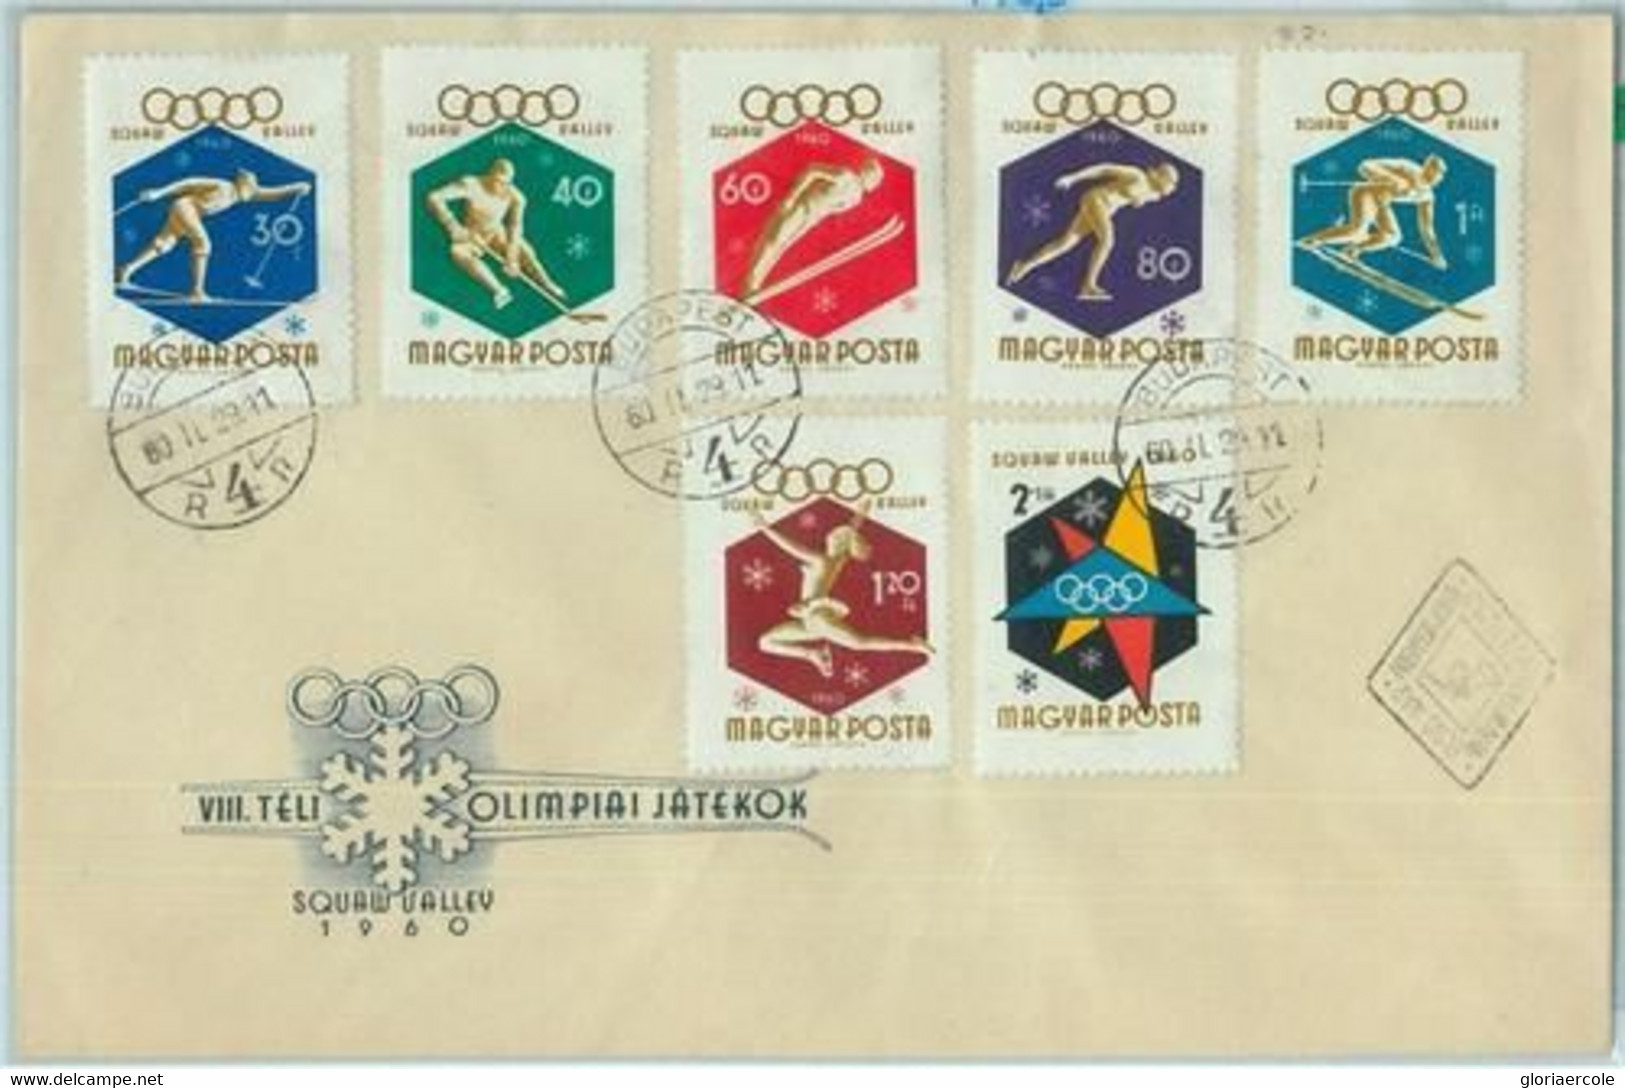 68000 - HUNGARY - POSTAL HISTORY -   Squaw Valley 1960 Winter Olympic Games FDC - Invierno 1960: Squaw Valley